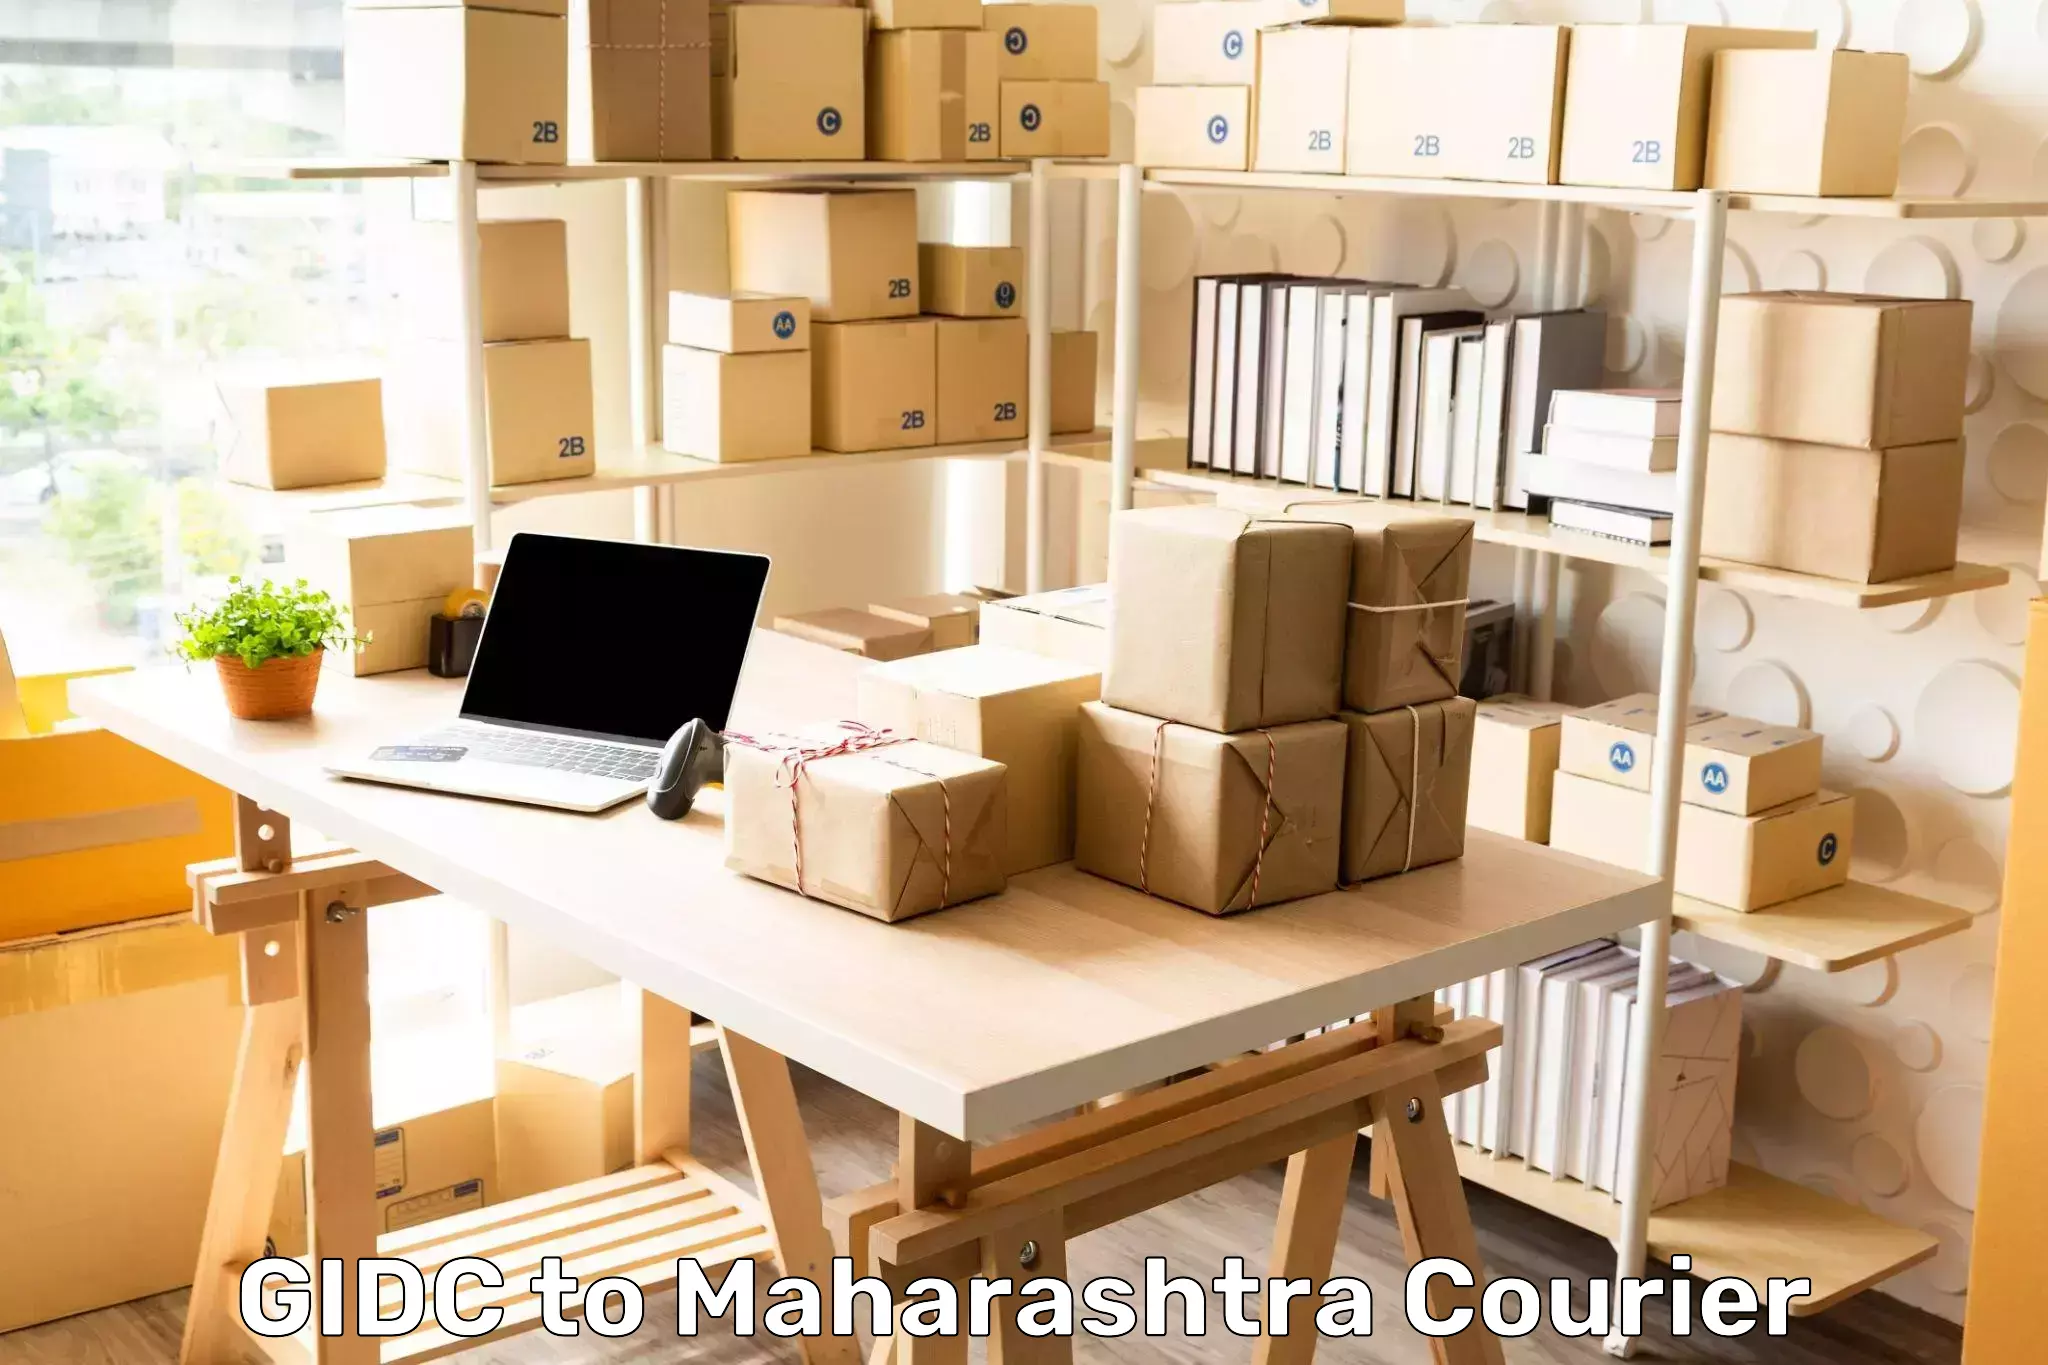 Courier dispatch services GIDC to Mahagaon